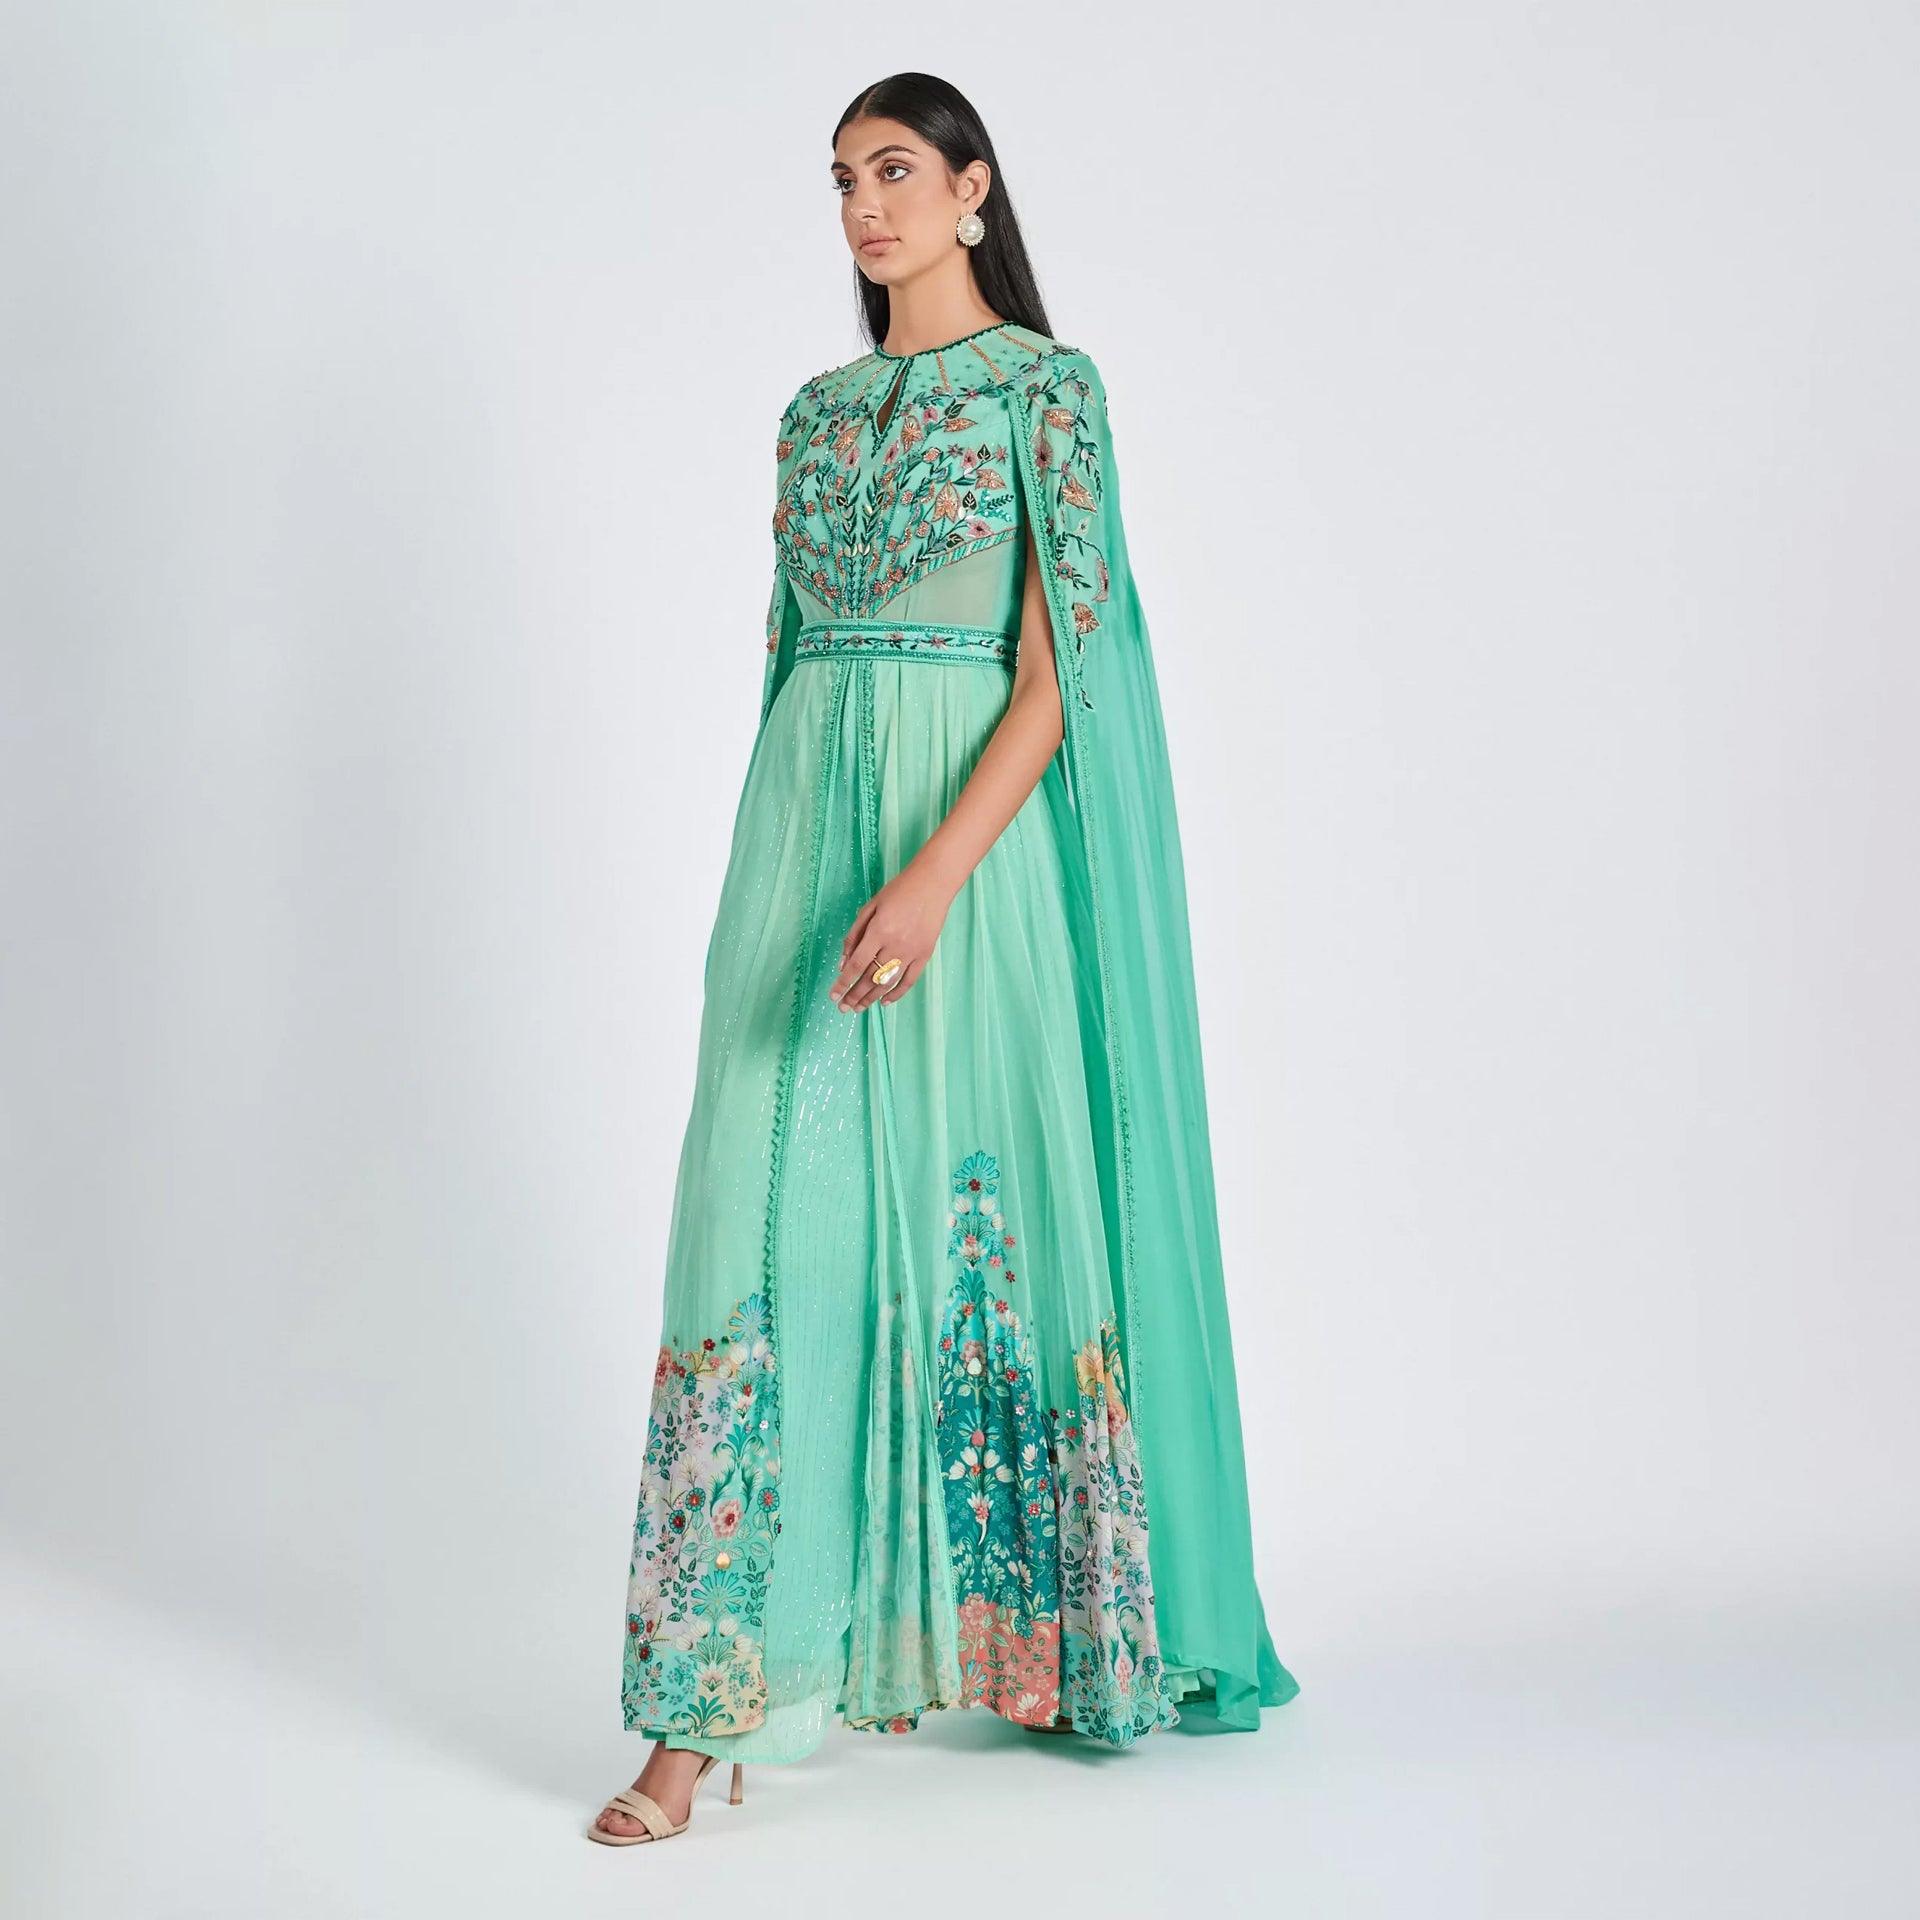 Turquoise Embroidery Samantha Dress From Shalky - WECRE8